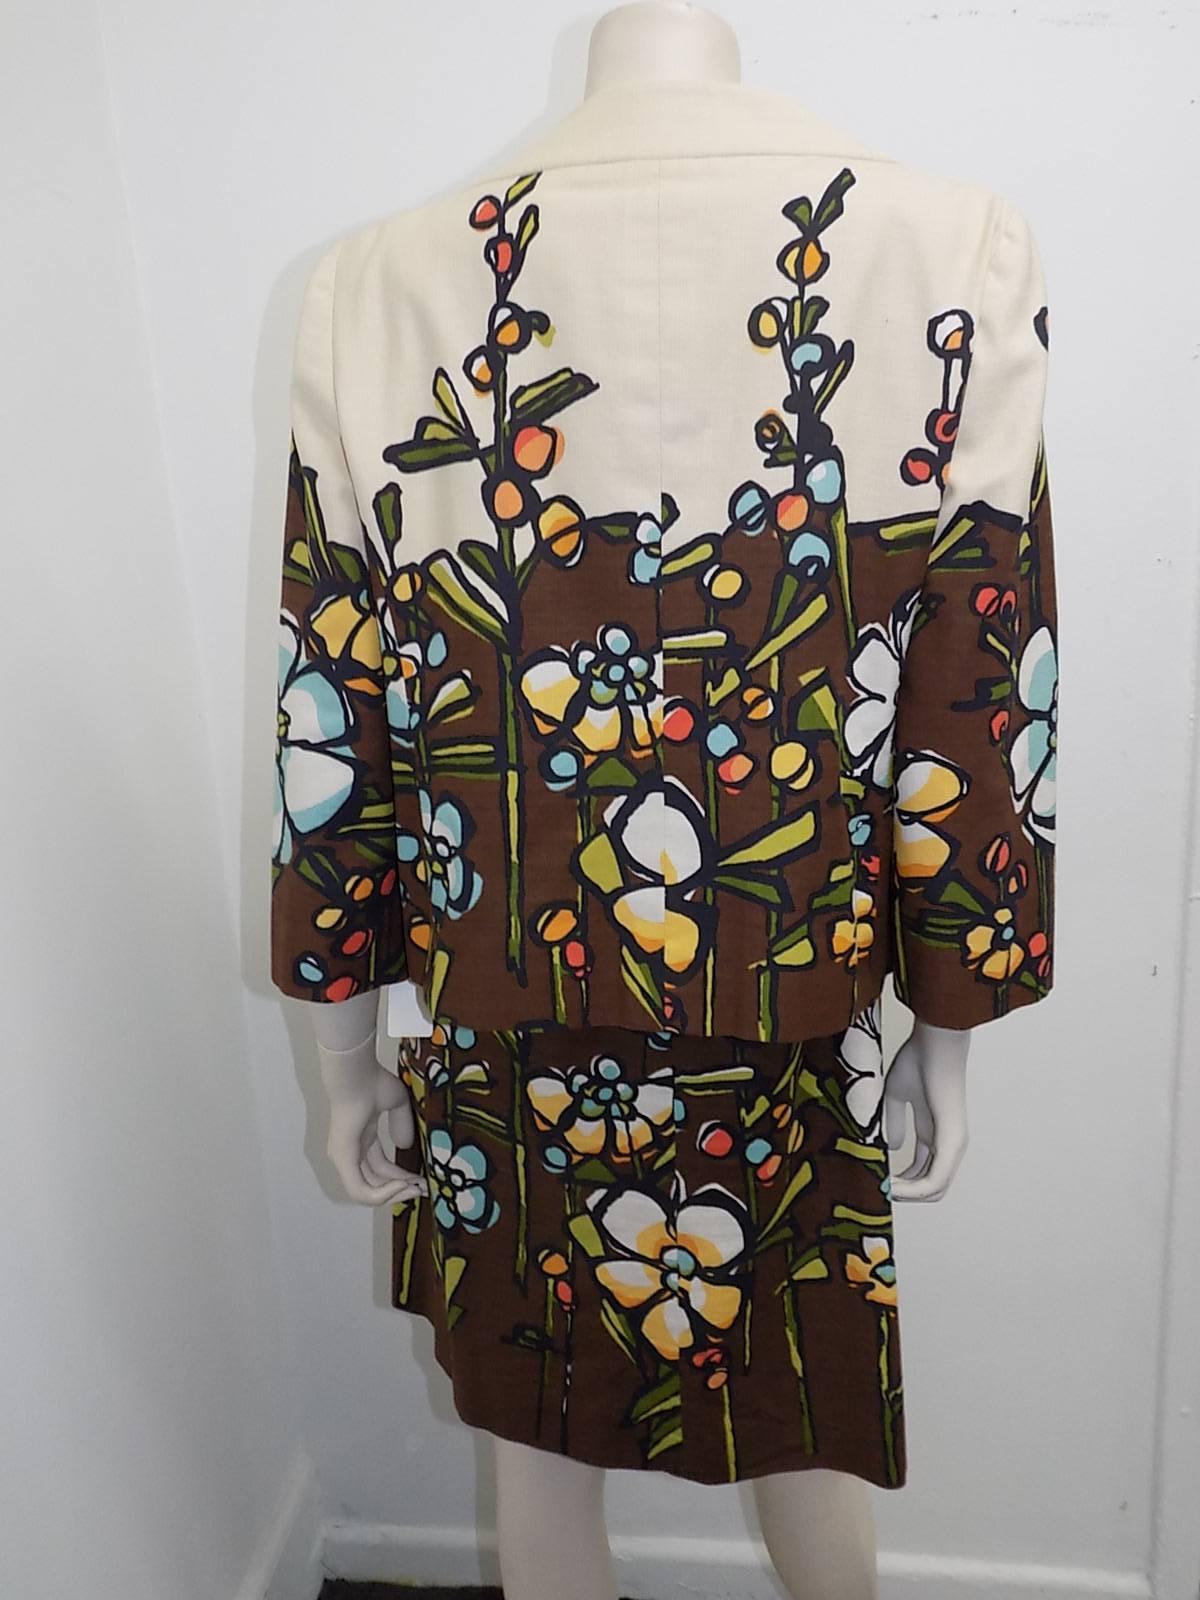 Moschino Rare   Dress and Jacket Cotton  Ensemble For Sale 3